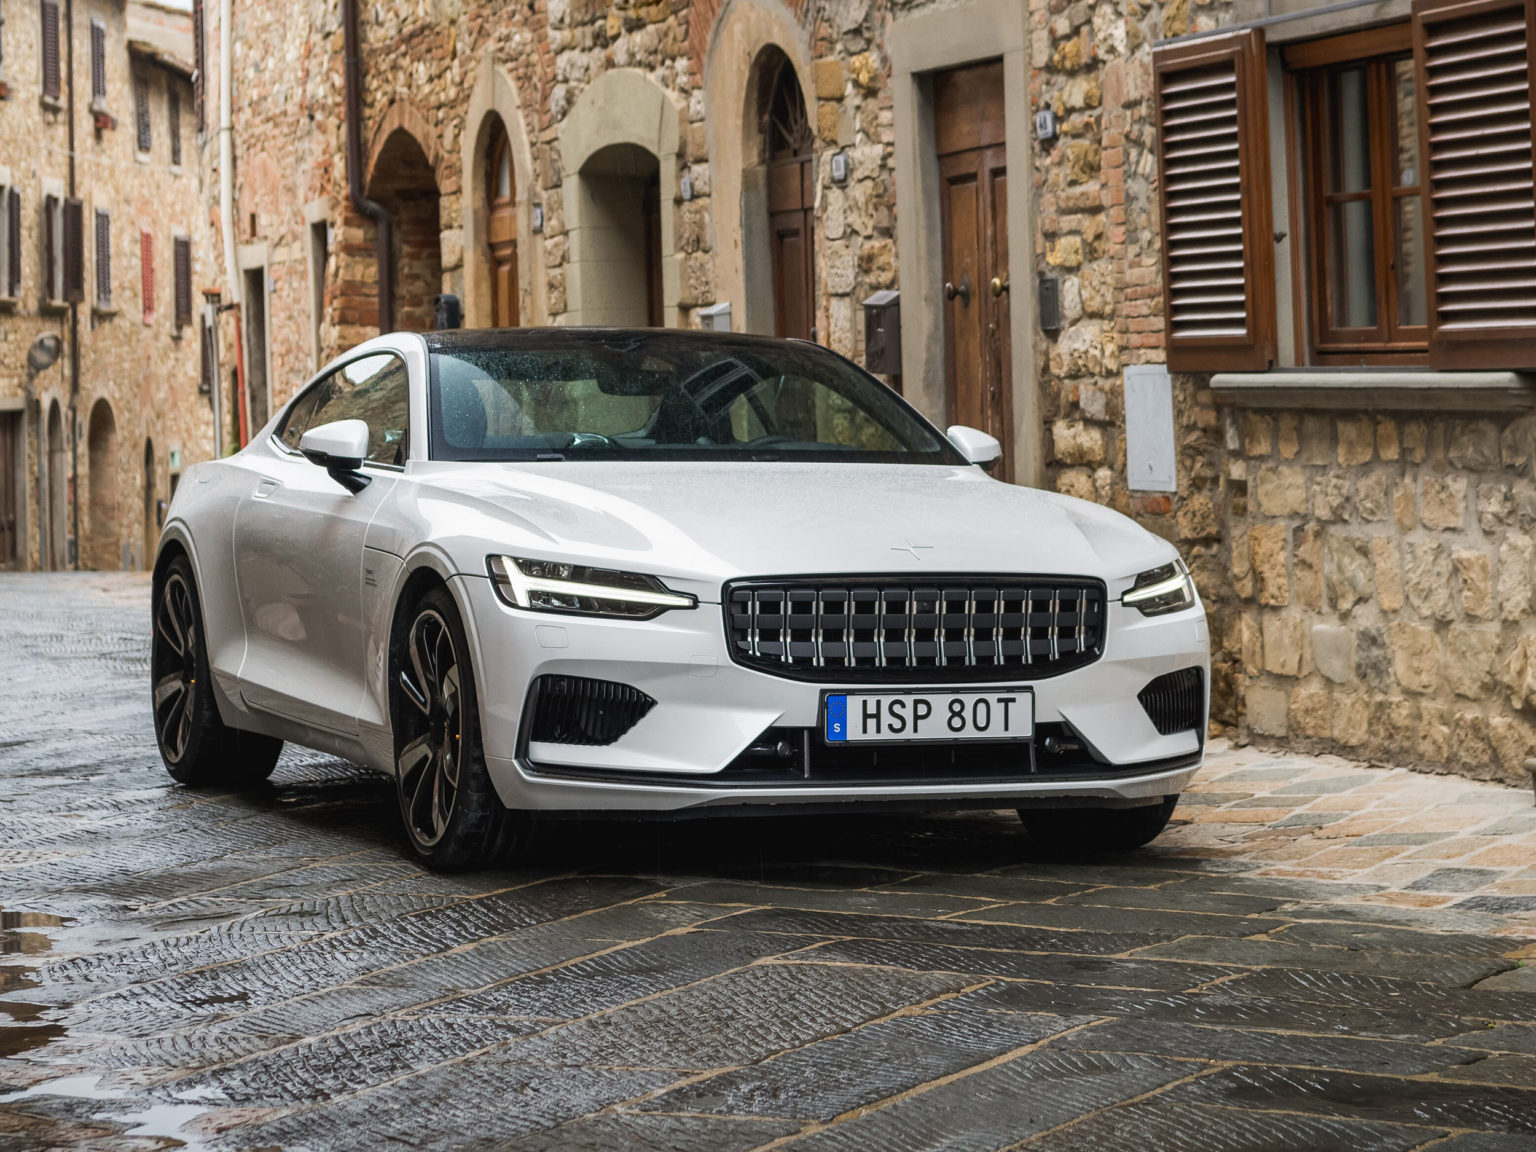 The Polestar 1 coupe is slated to start being delivered to customers in 2021.